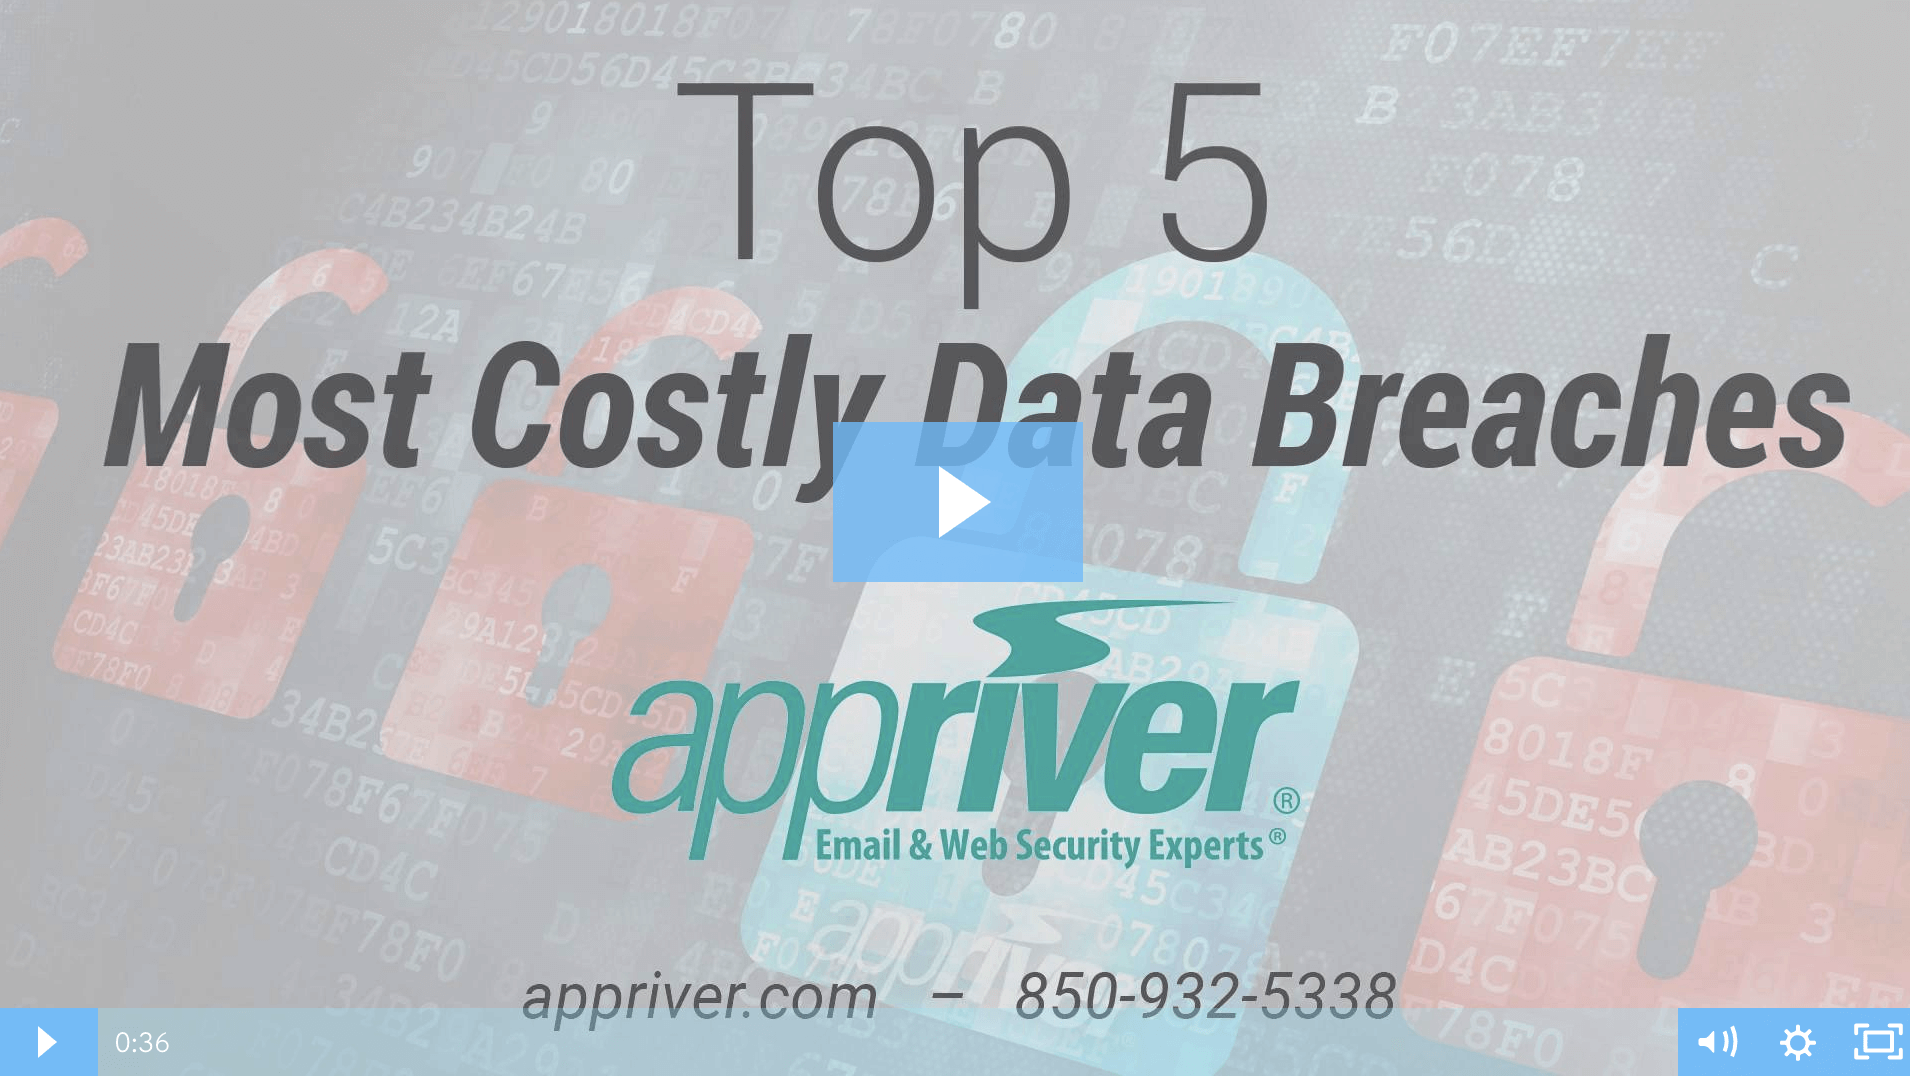 AppRiver - Most Costly Data Breaches